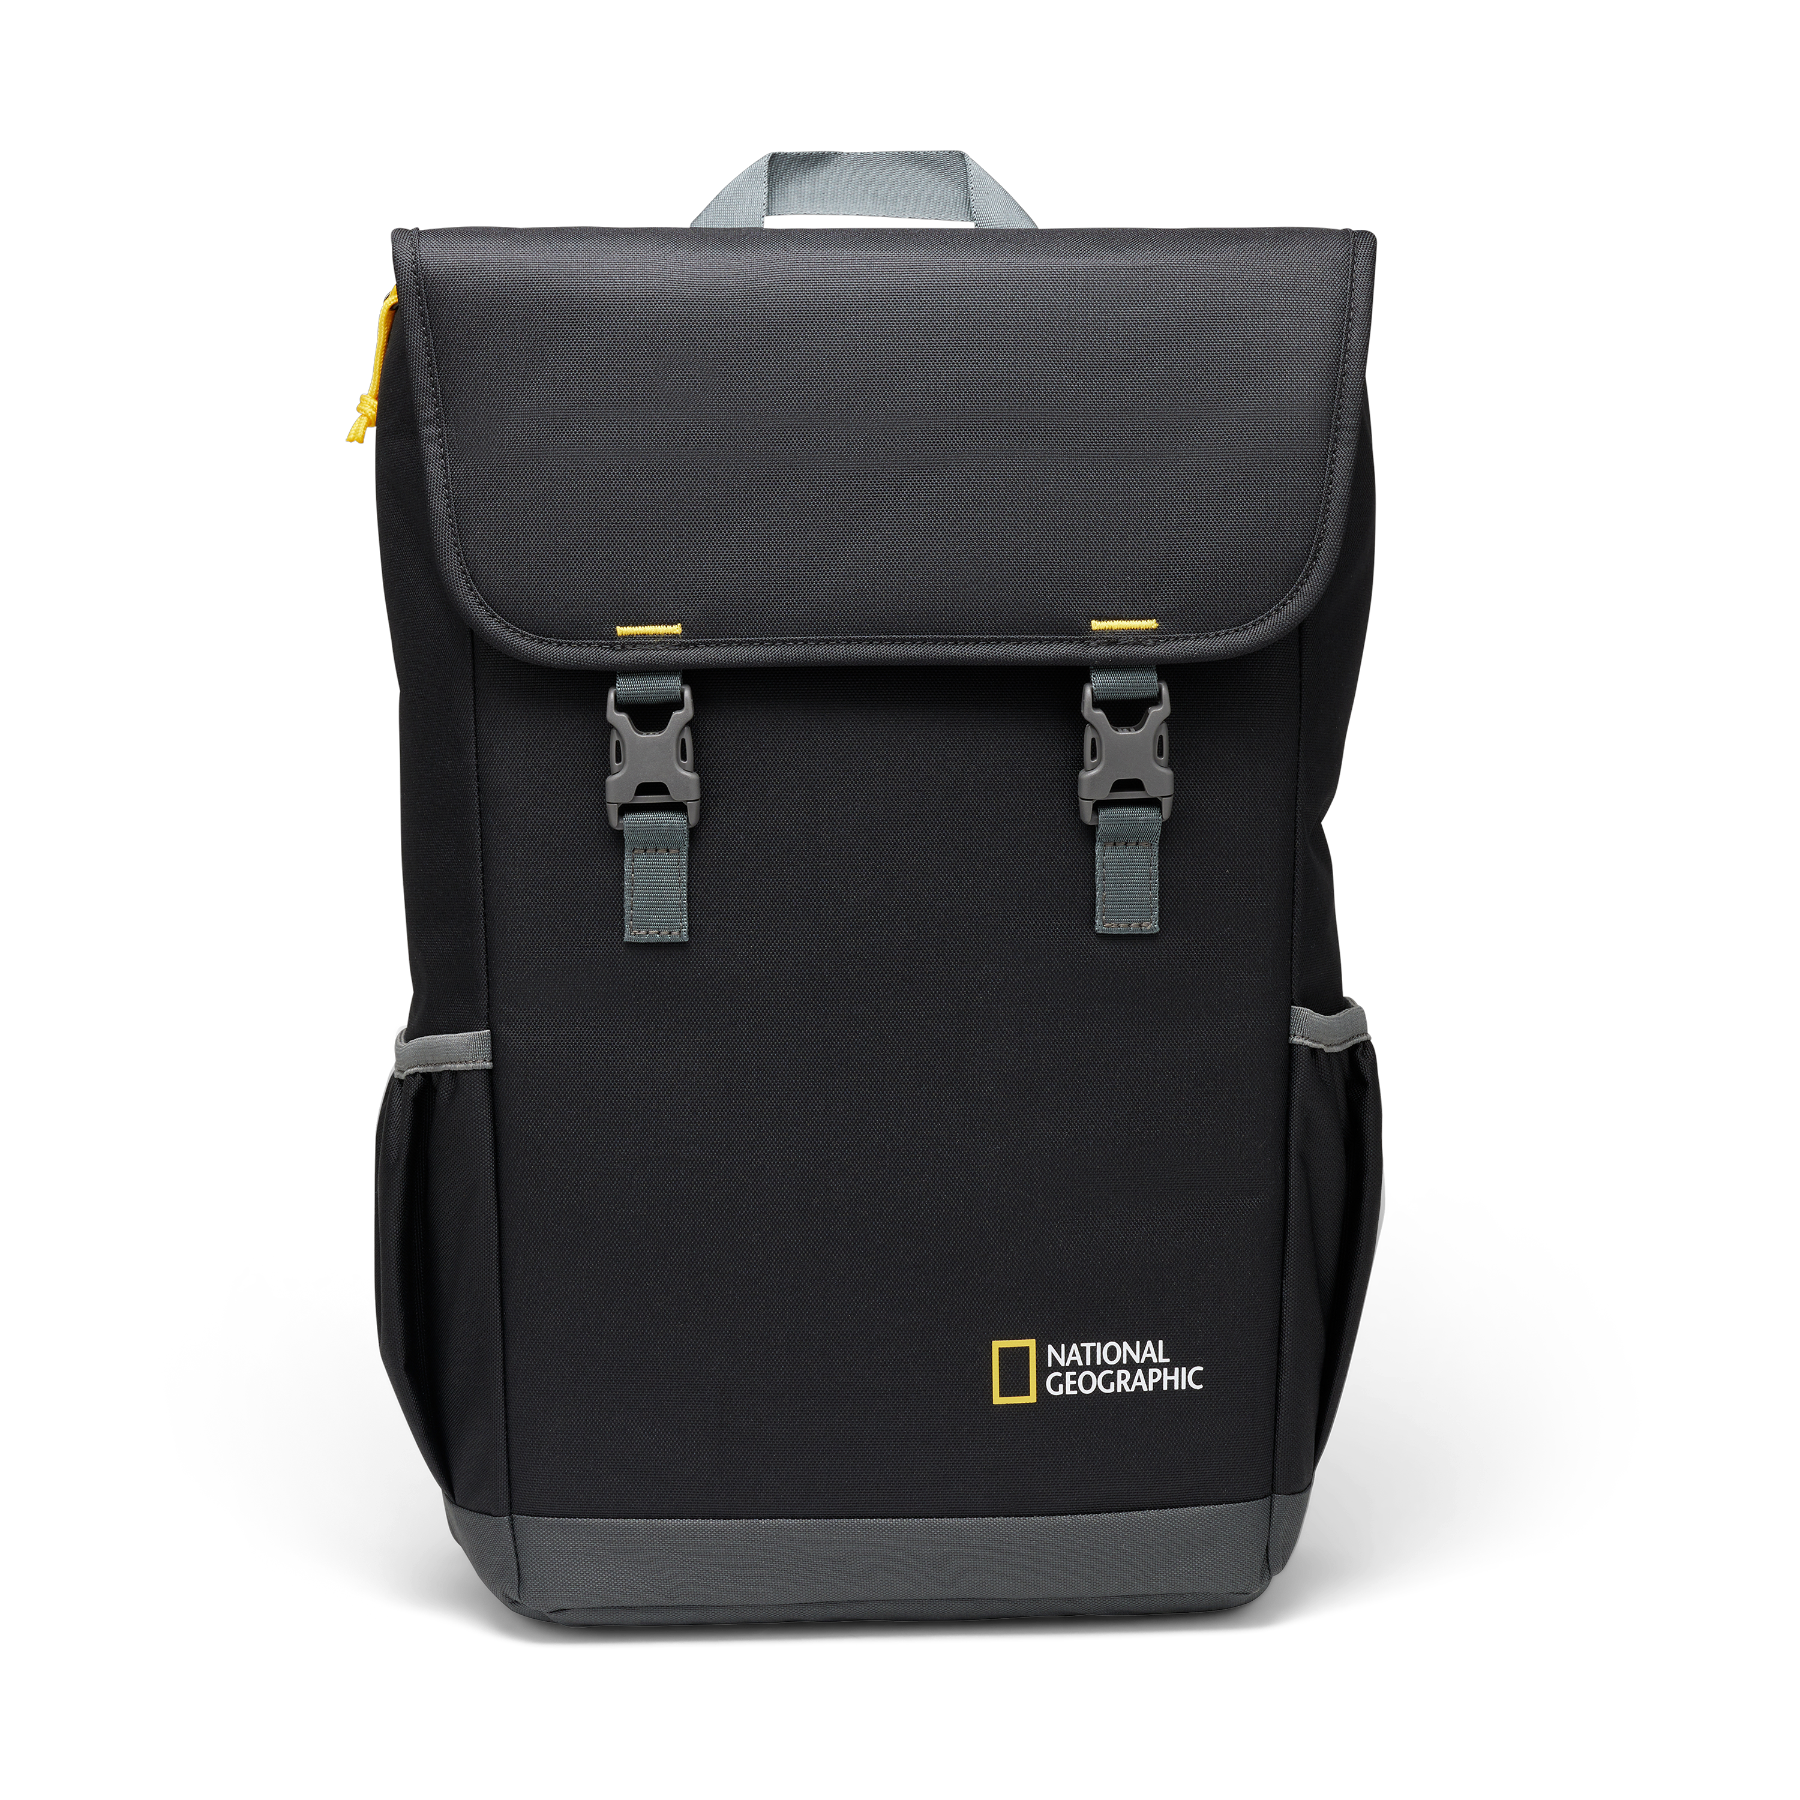 National Geographic Camera Bags & Backpacks | Manfrotto - Manfrotto